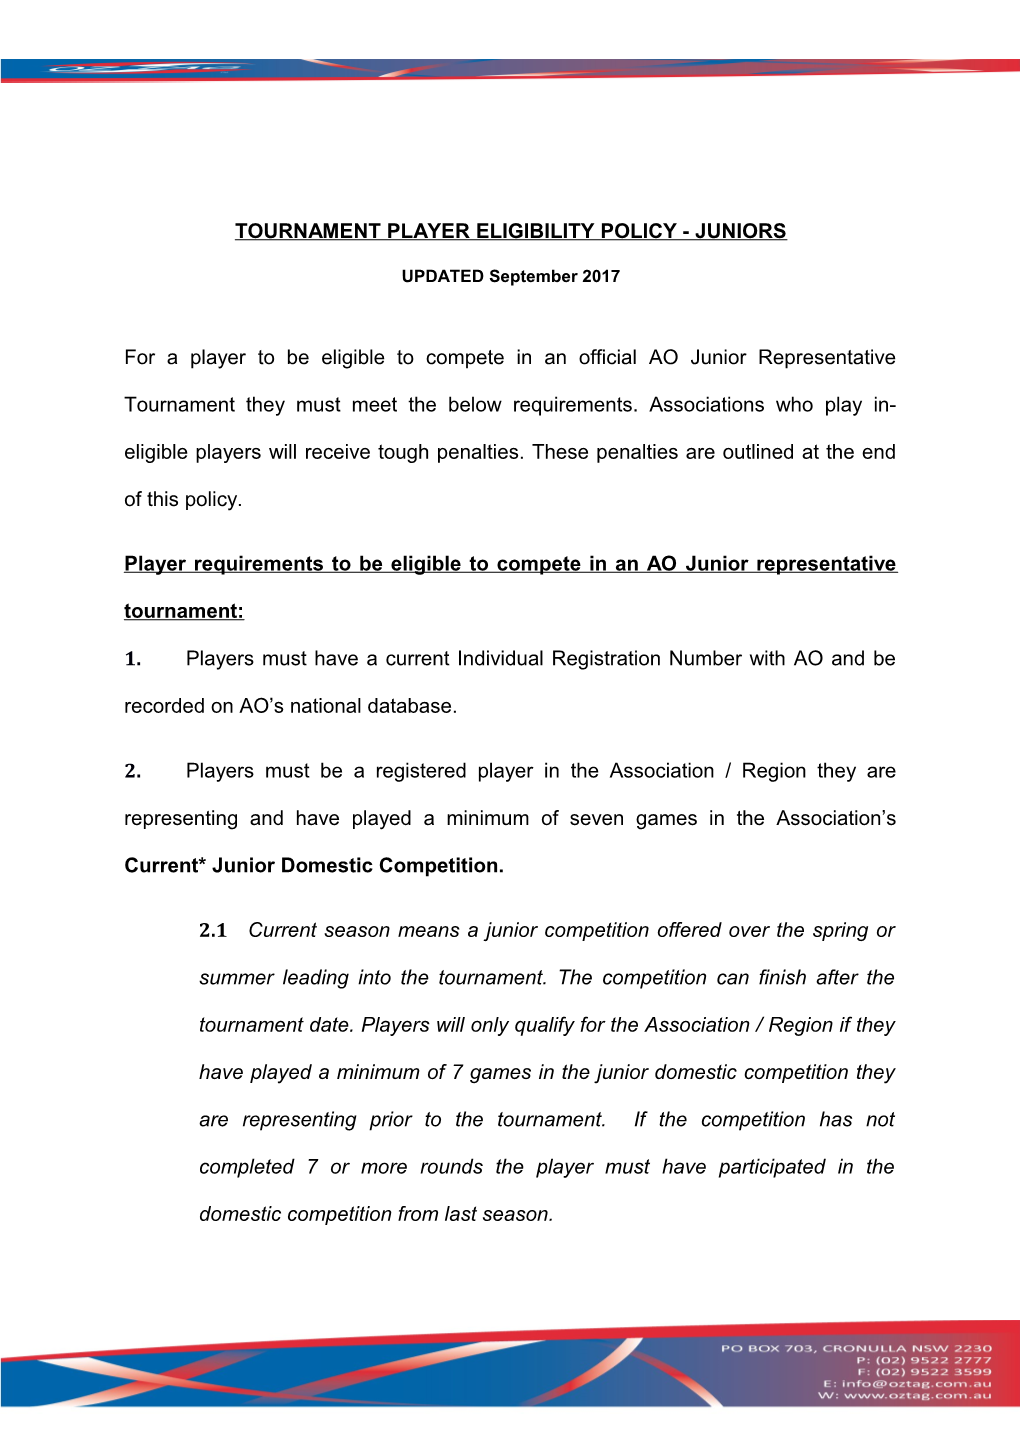 Tournament Player Eligibility Policy - Juniors